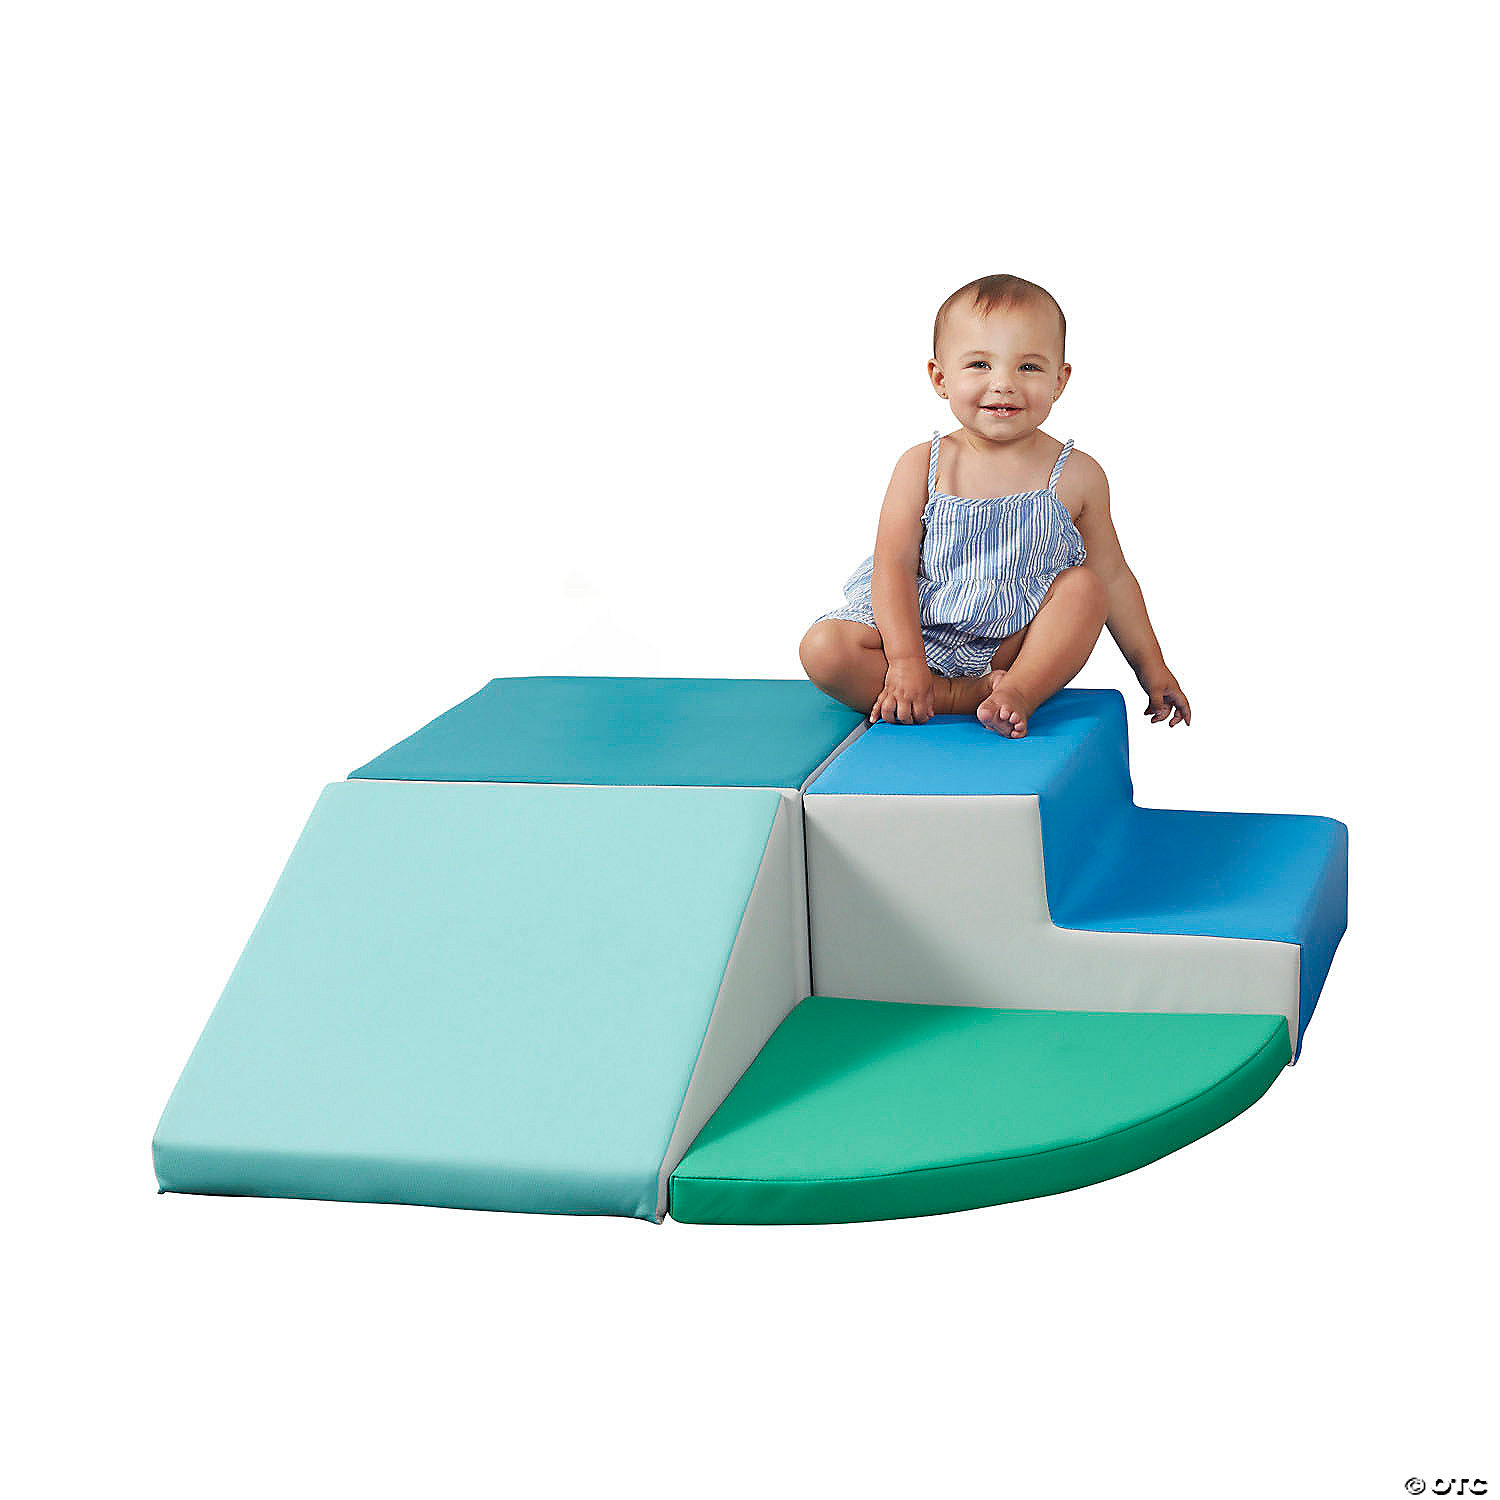 FDP SoftScape Cascade Corner Toddler Climber for Toddlers and Kids Soft Foam Structure for Active Play Contemporary 